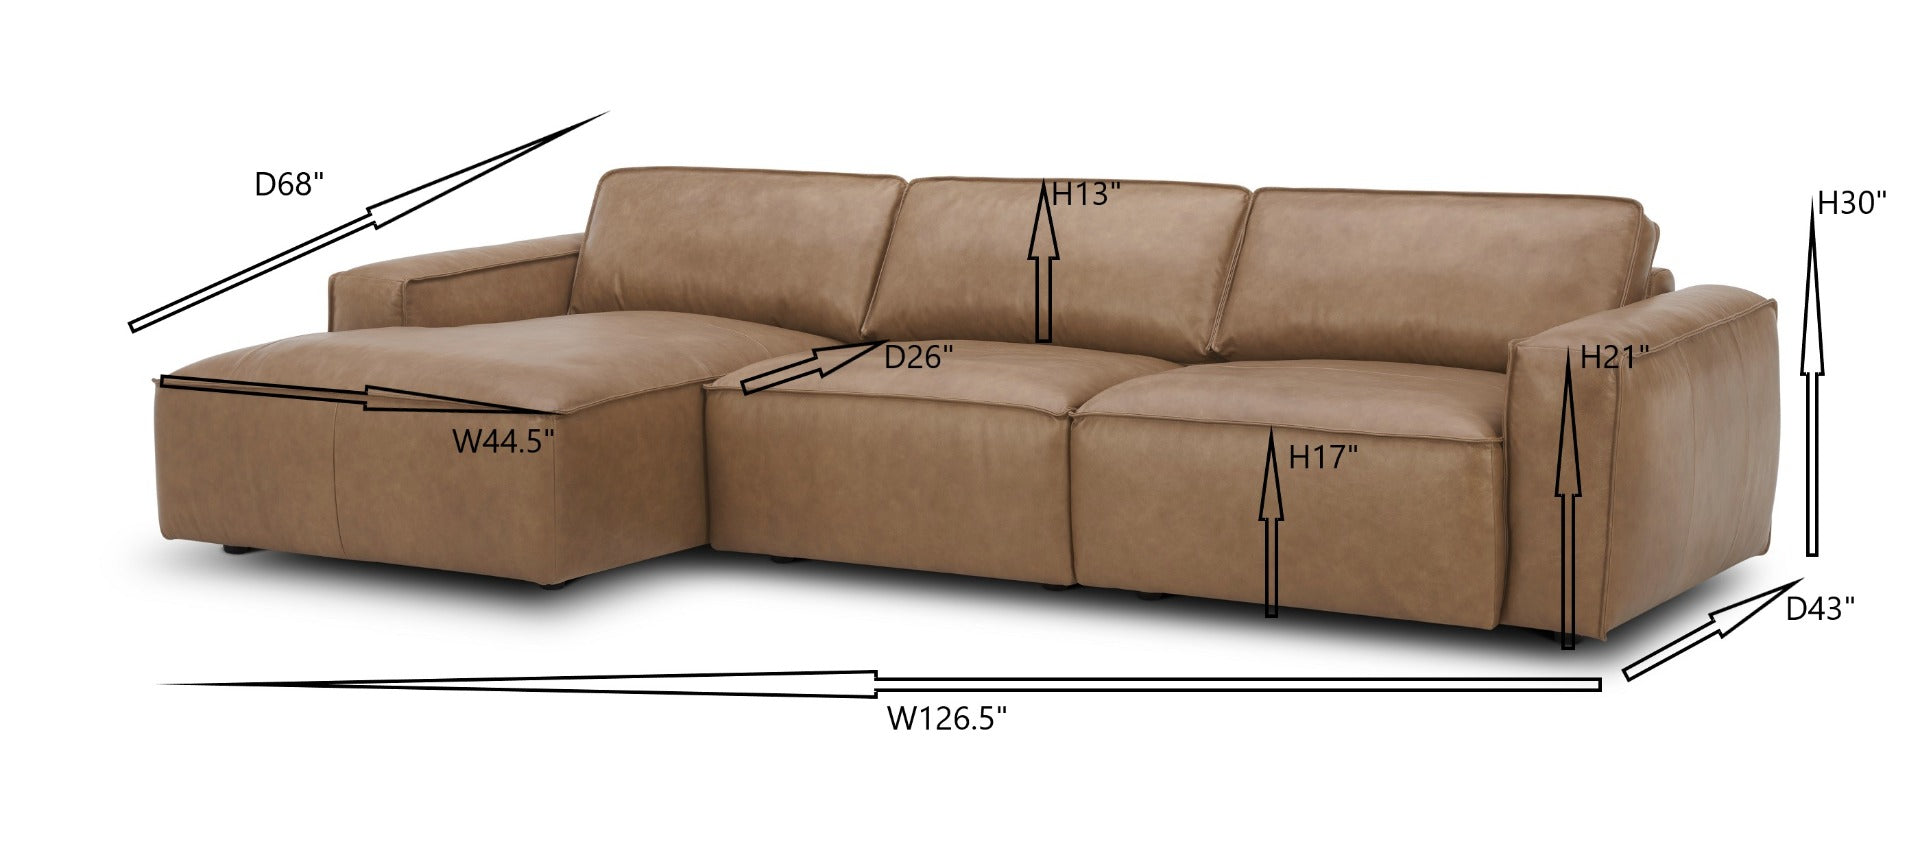 Modrest Cambria - Modern LAF Cognac Leather Sectional Sofa-Sectional Sofa-VIG-Wall2Wall Furnishings